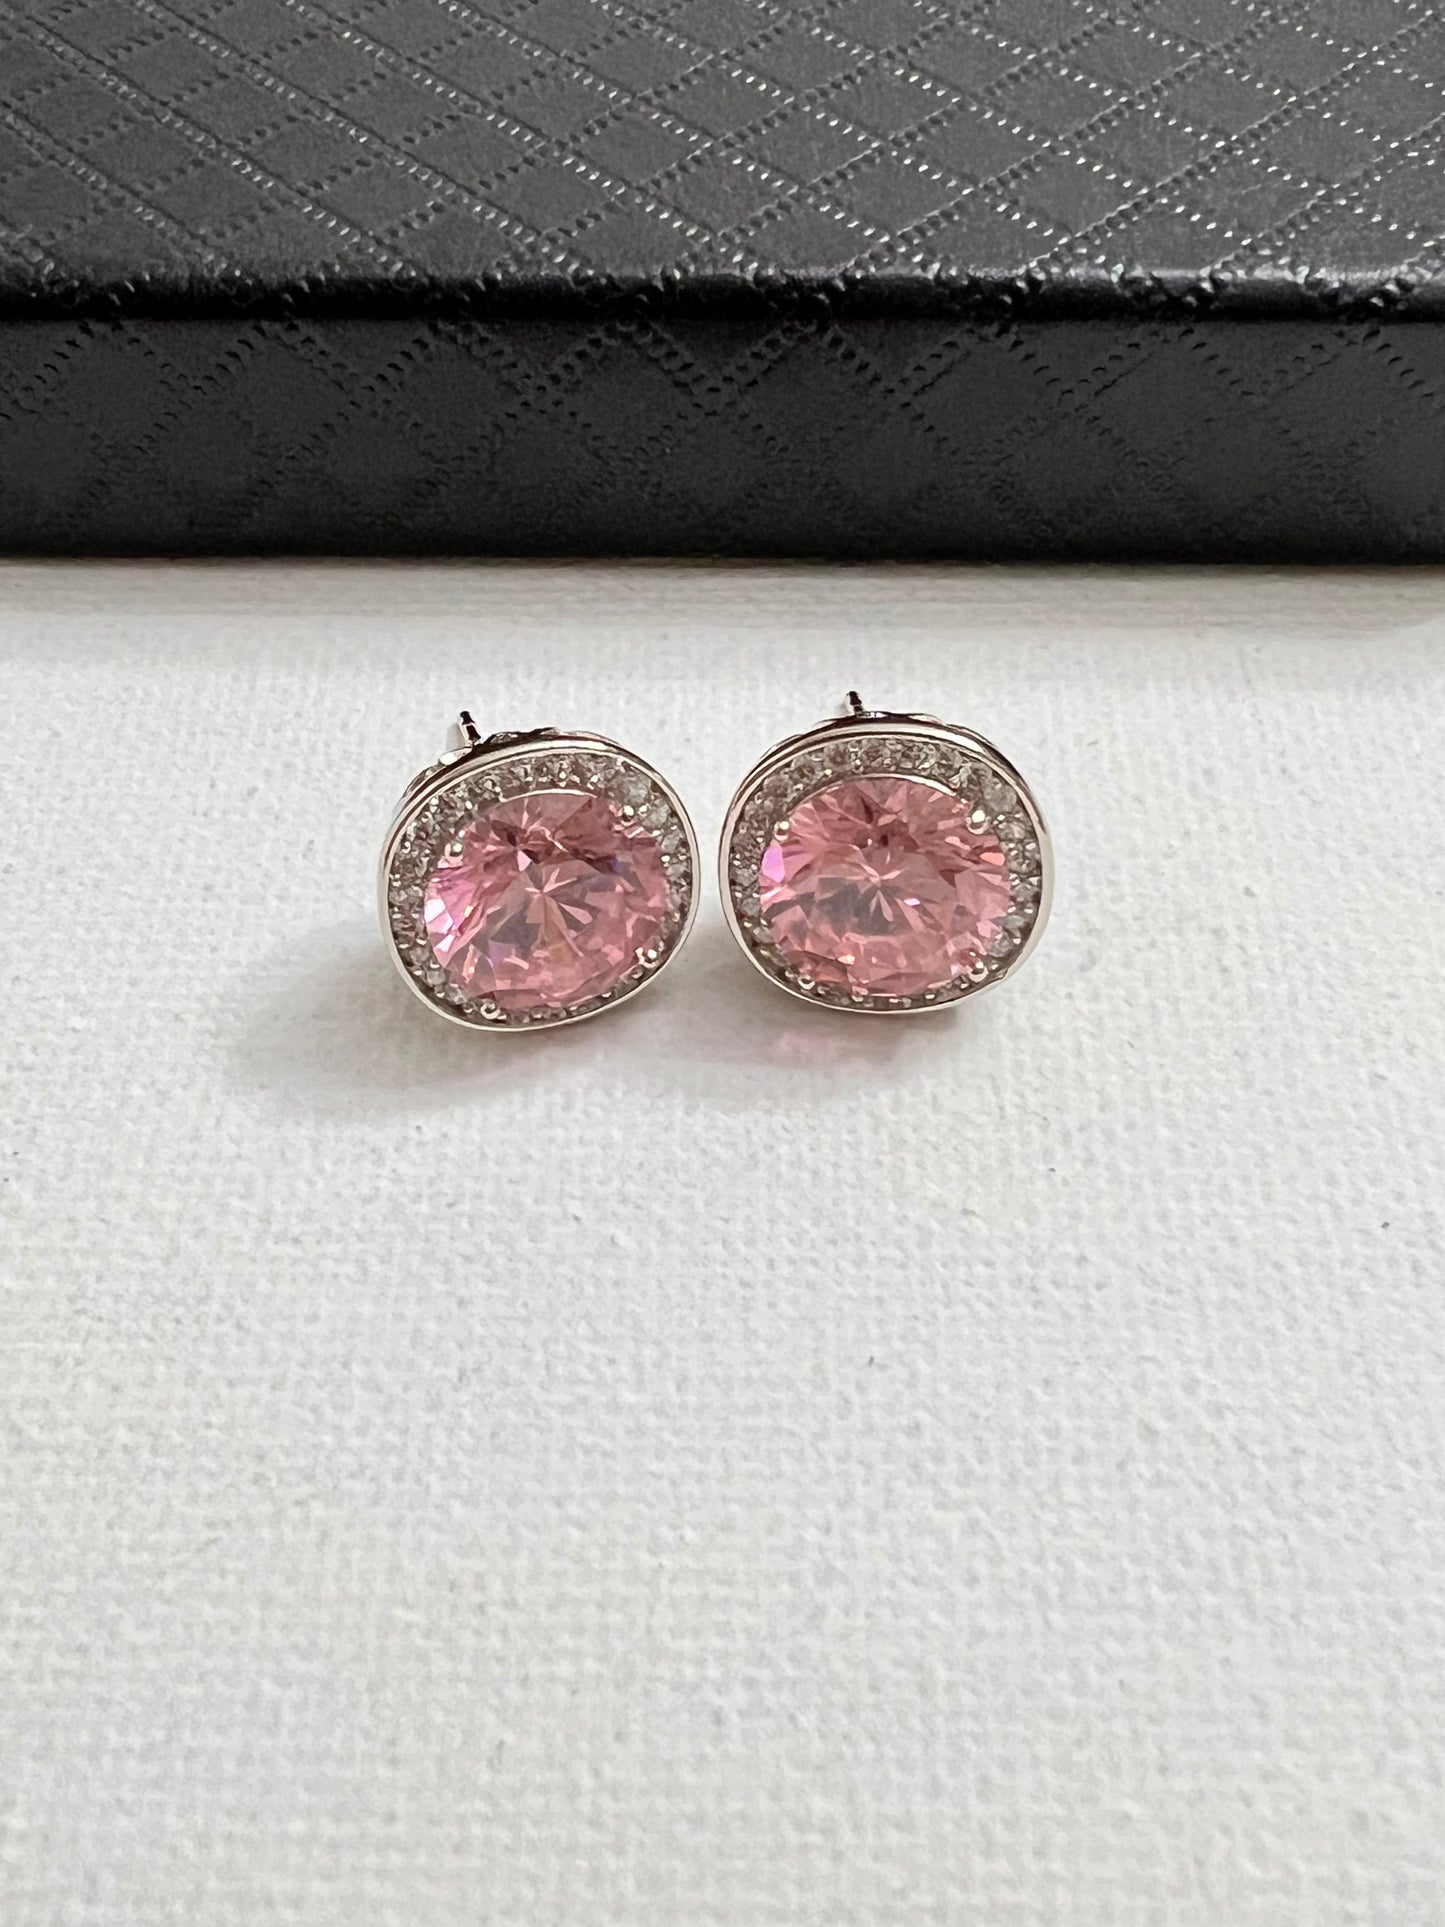 Captivating 3D Design: Front and Back Silver Stud Earrings - Elevate Your Style with Unique and Contemporary Fashion Accessories"